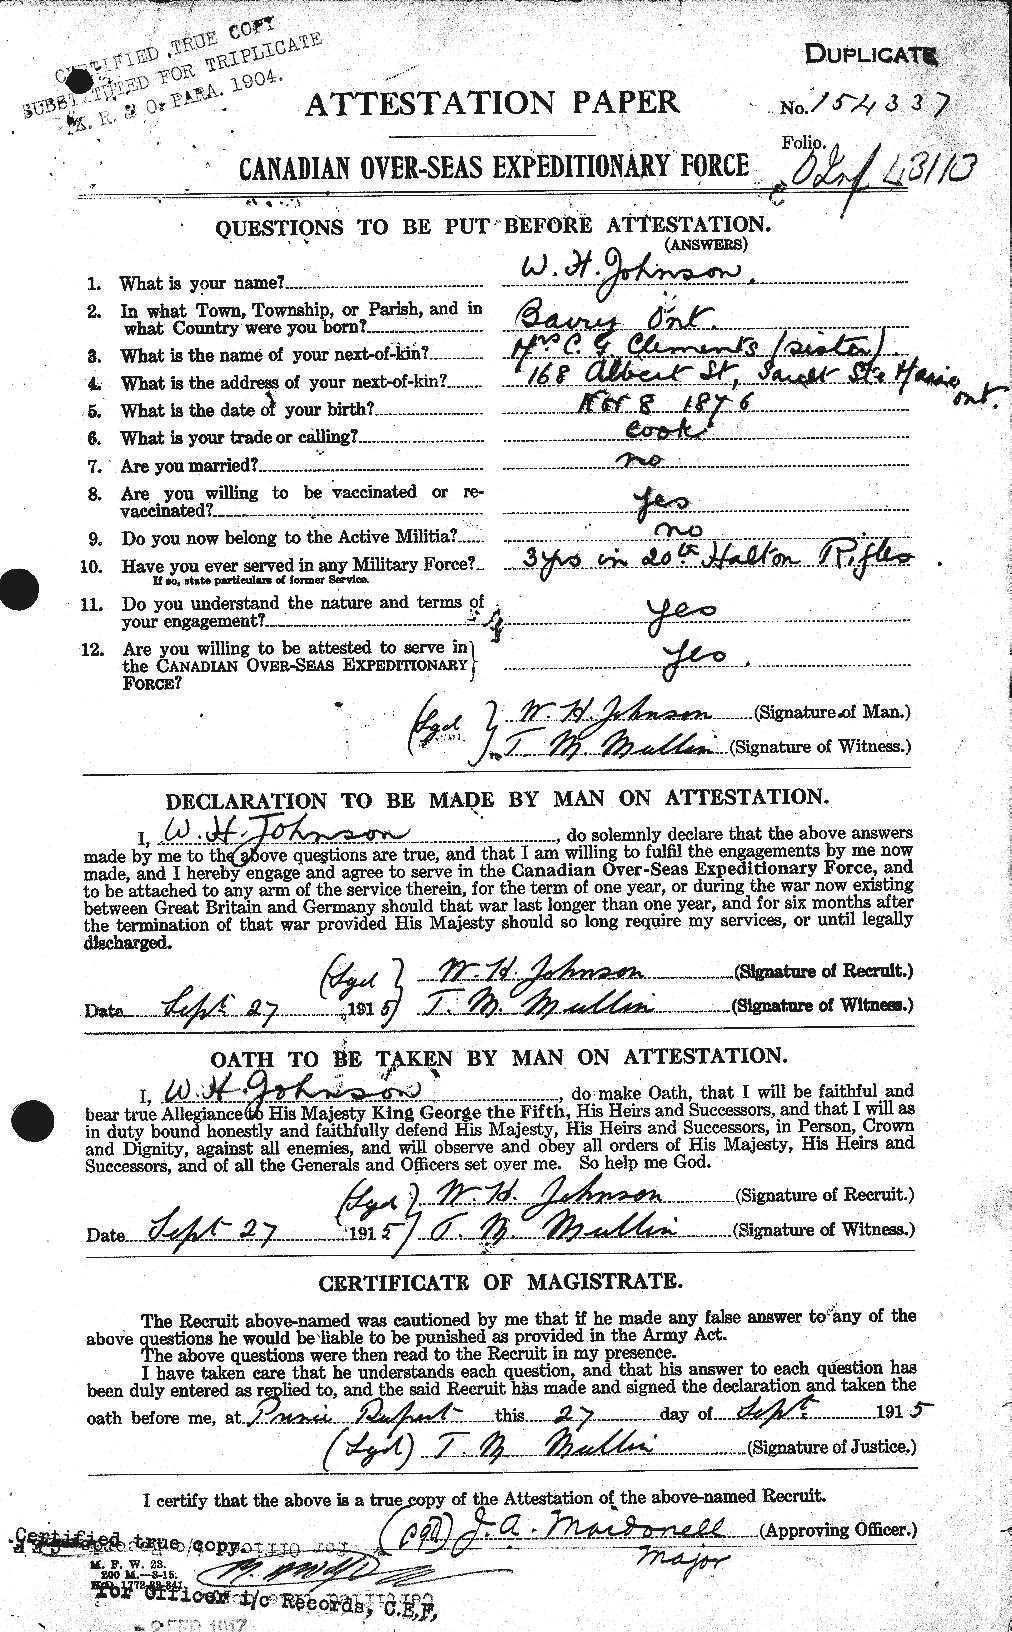 Personnel Records of the First World War - CEF 417576a